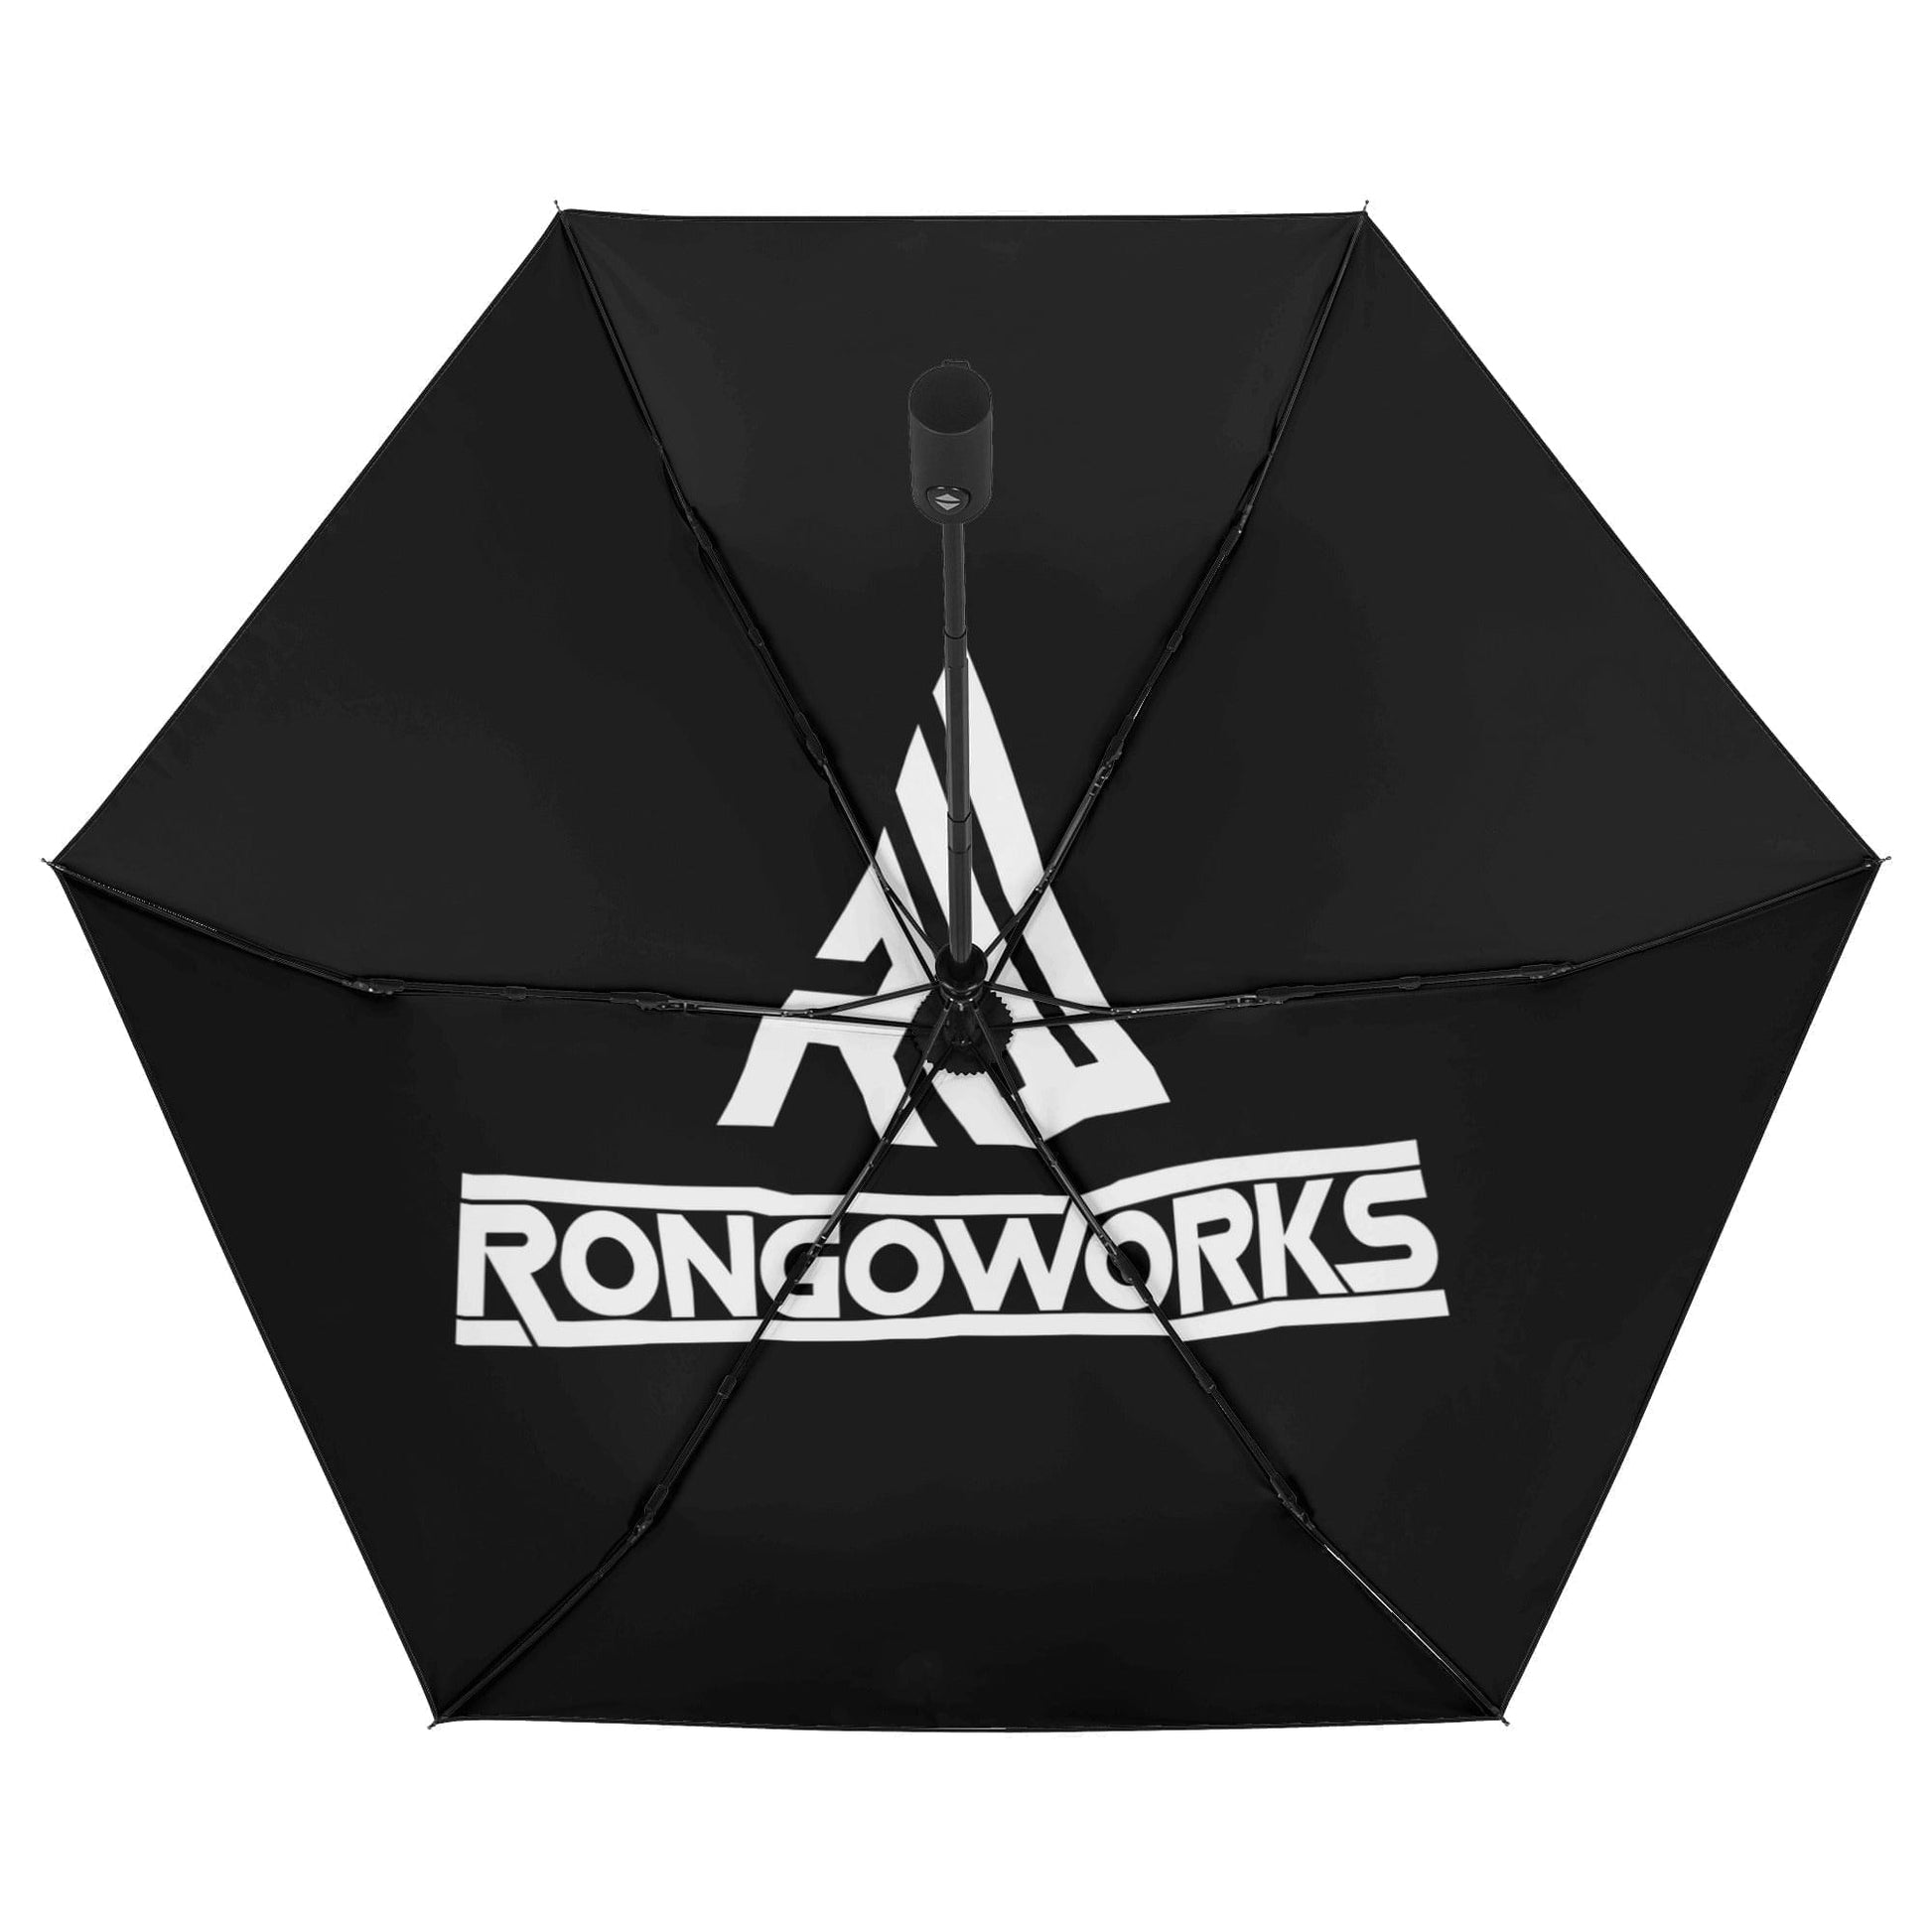 Rongoworks All Over Printed Inside Umbrella Rongoworks